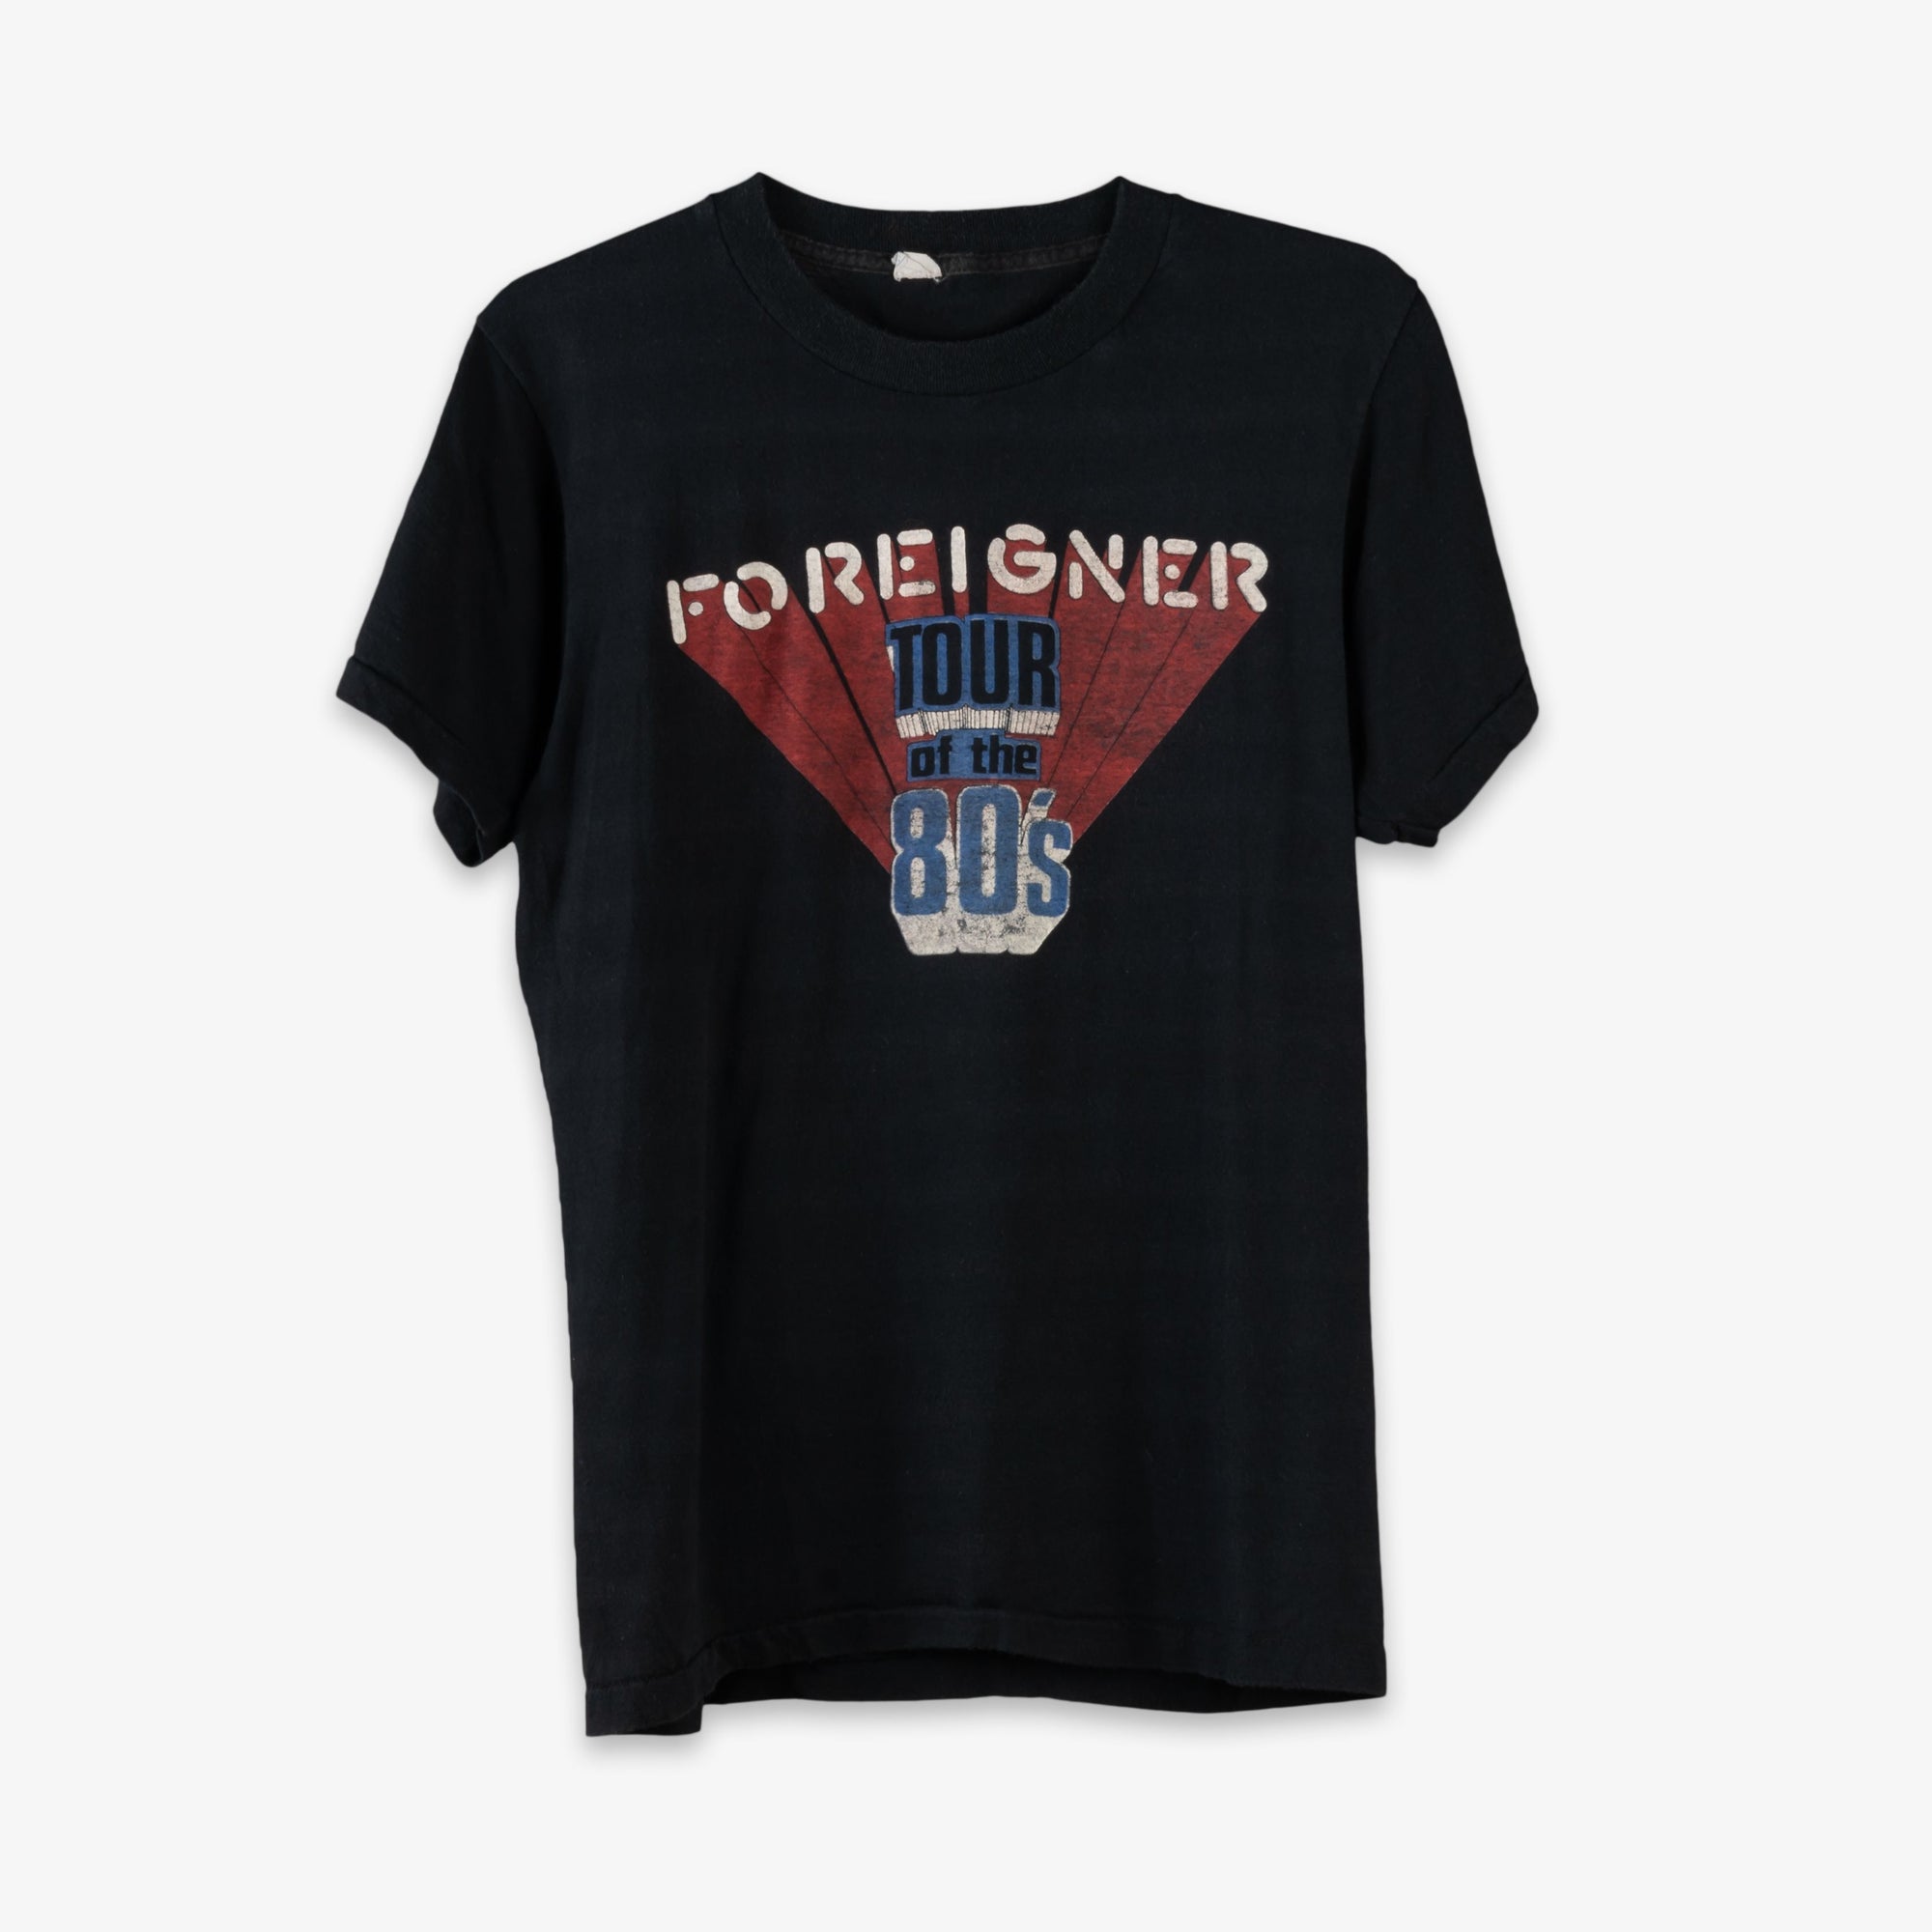 FOREIGNER TOUR OF THE 80s TEE